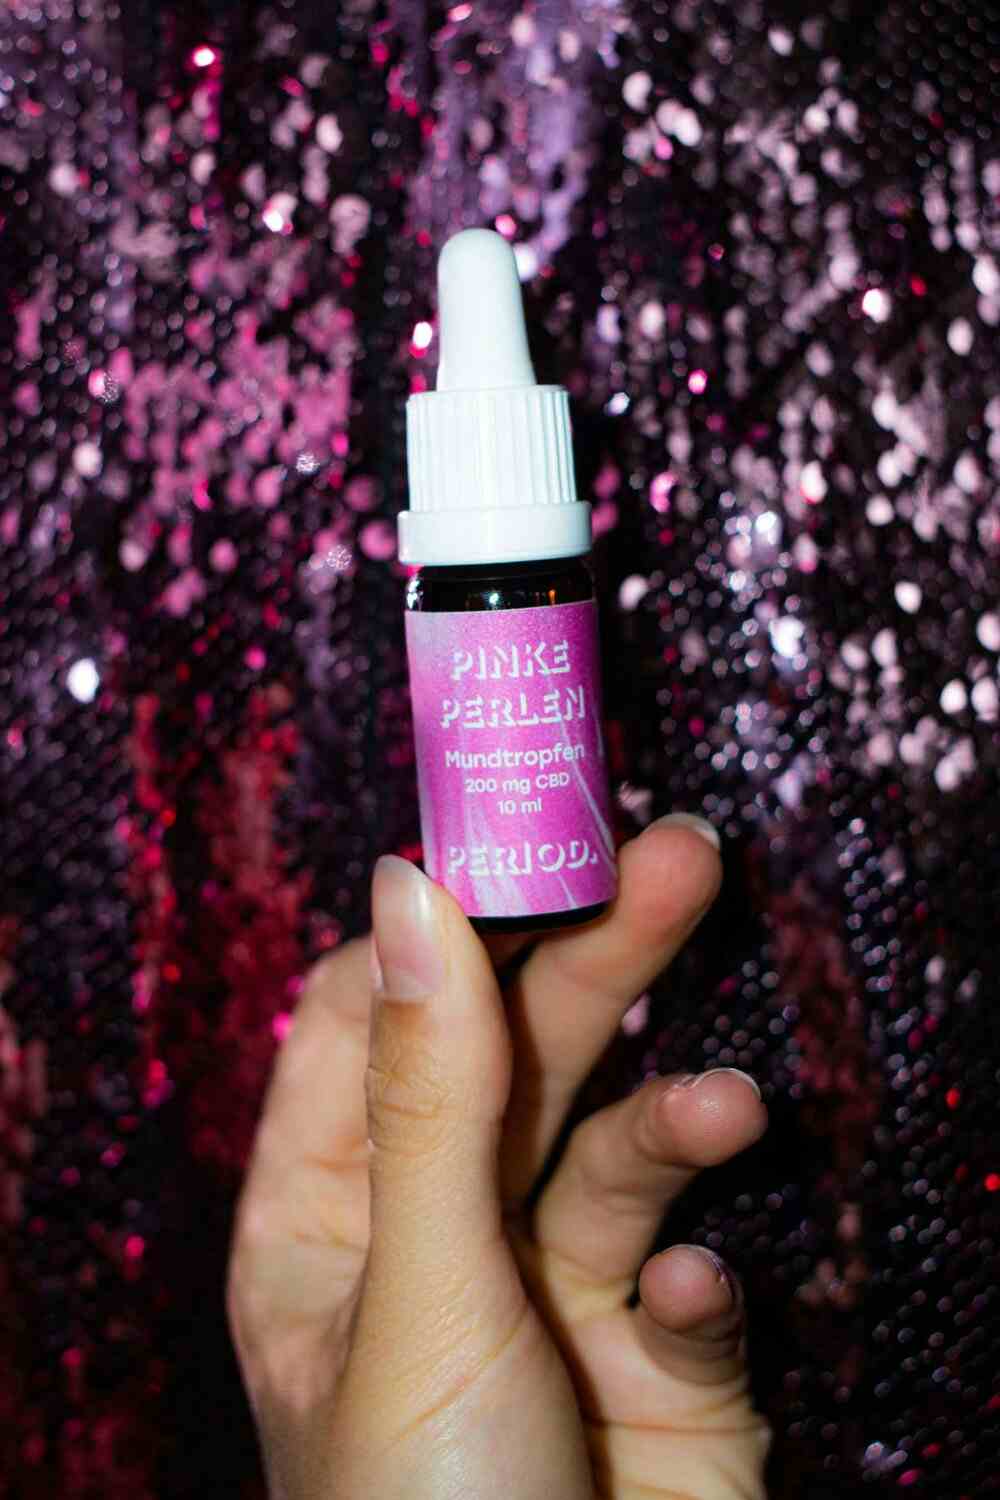 Pink pearls mouth drops for period symptoms relief 